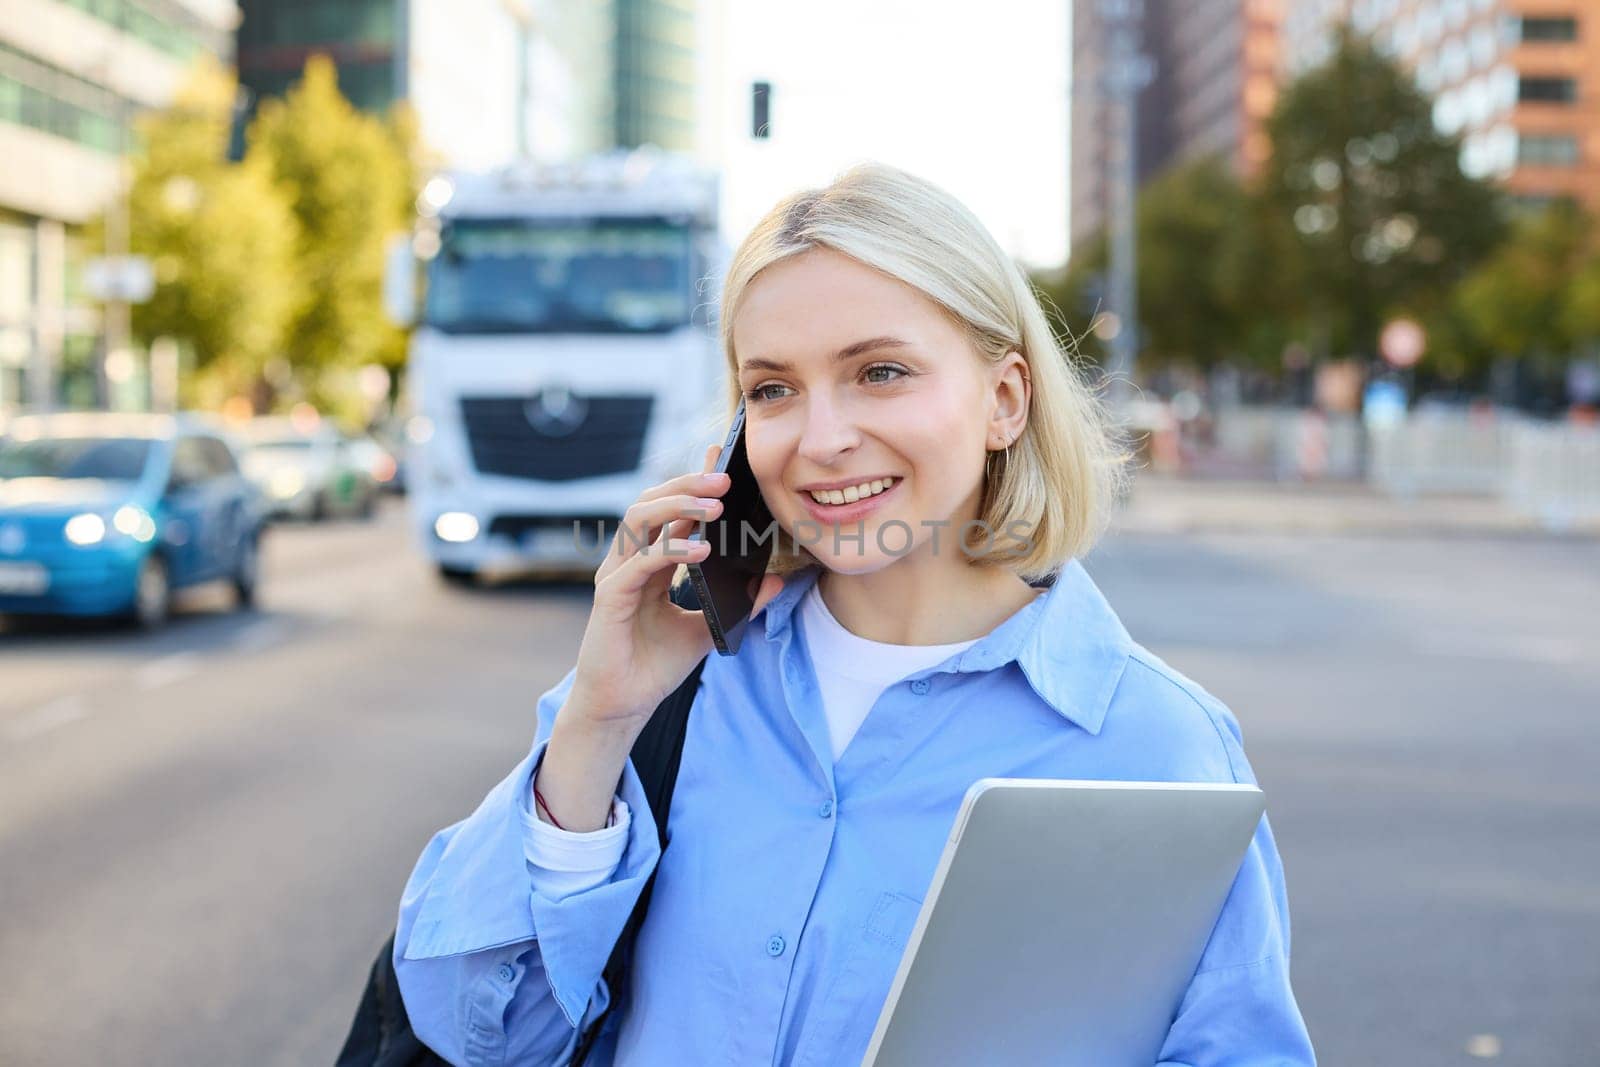 Close up portrait of young woman with laptop, standing on street near busy road in city, talking on mobile phone, answers a call. Lifestyle concept